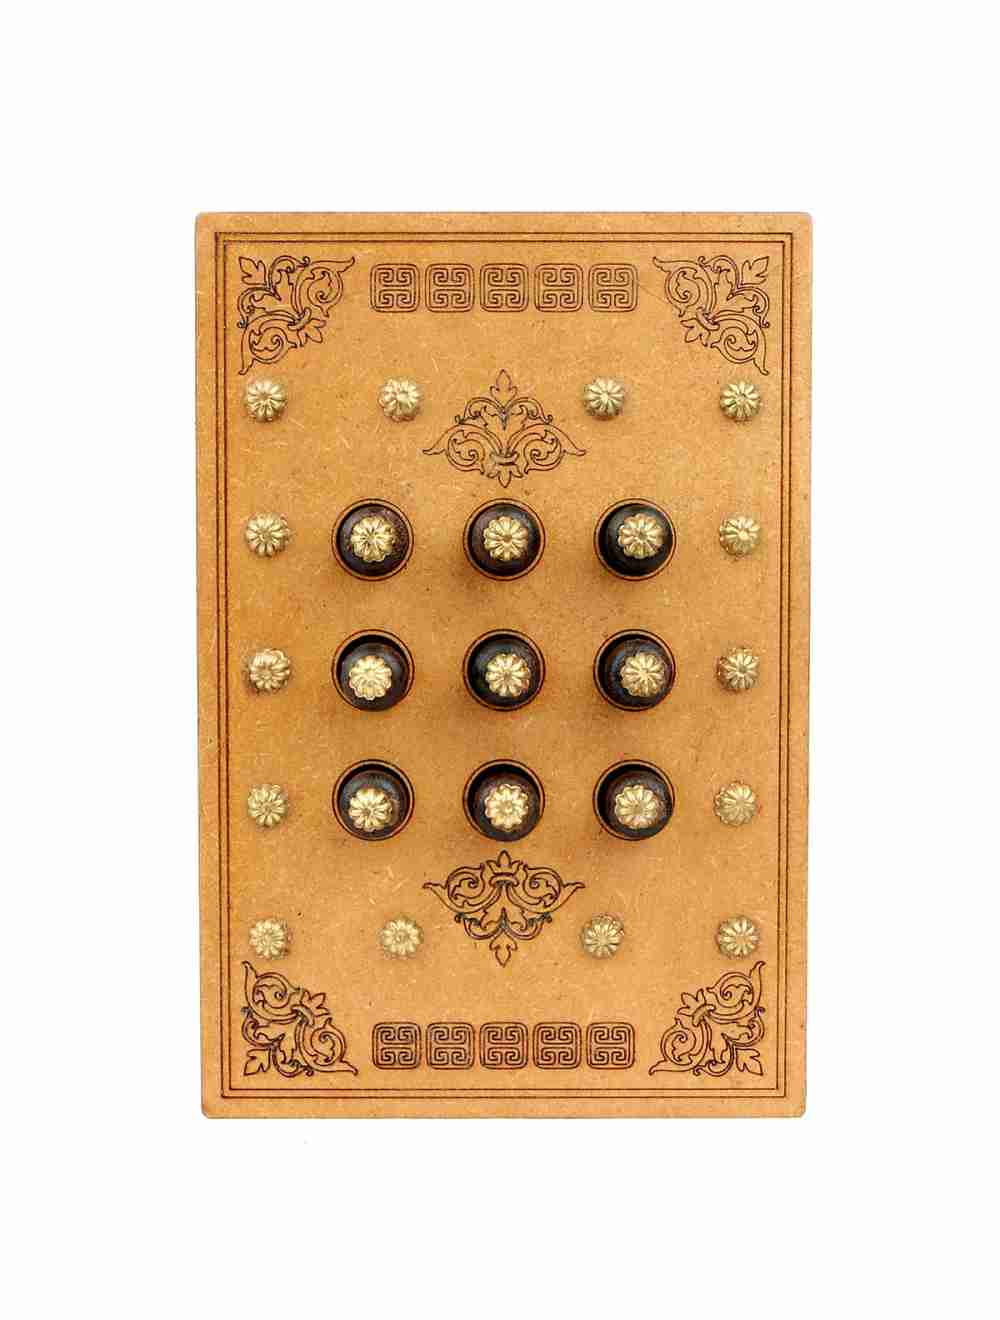 Planets trick box wooden puzzle